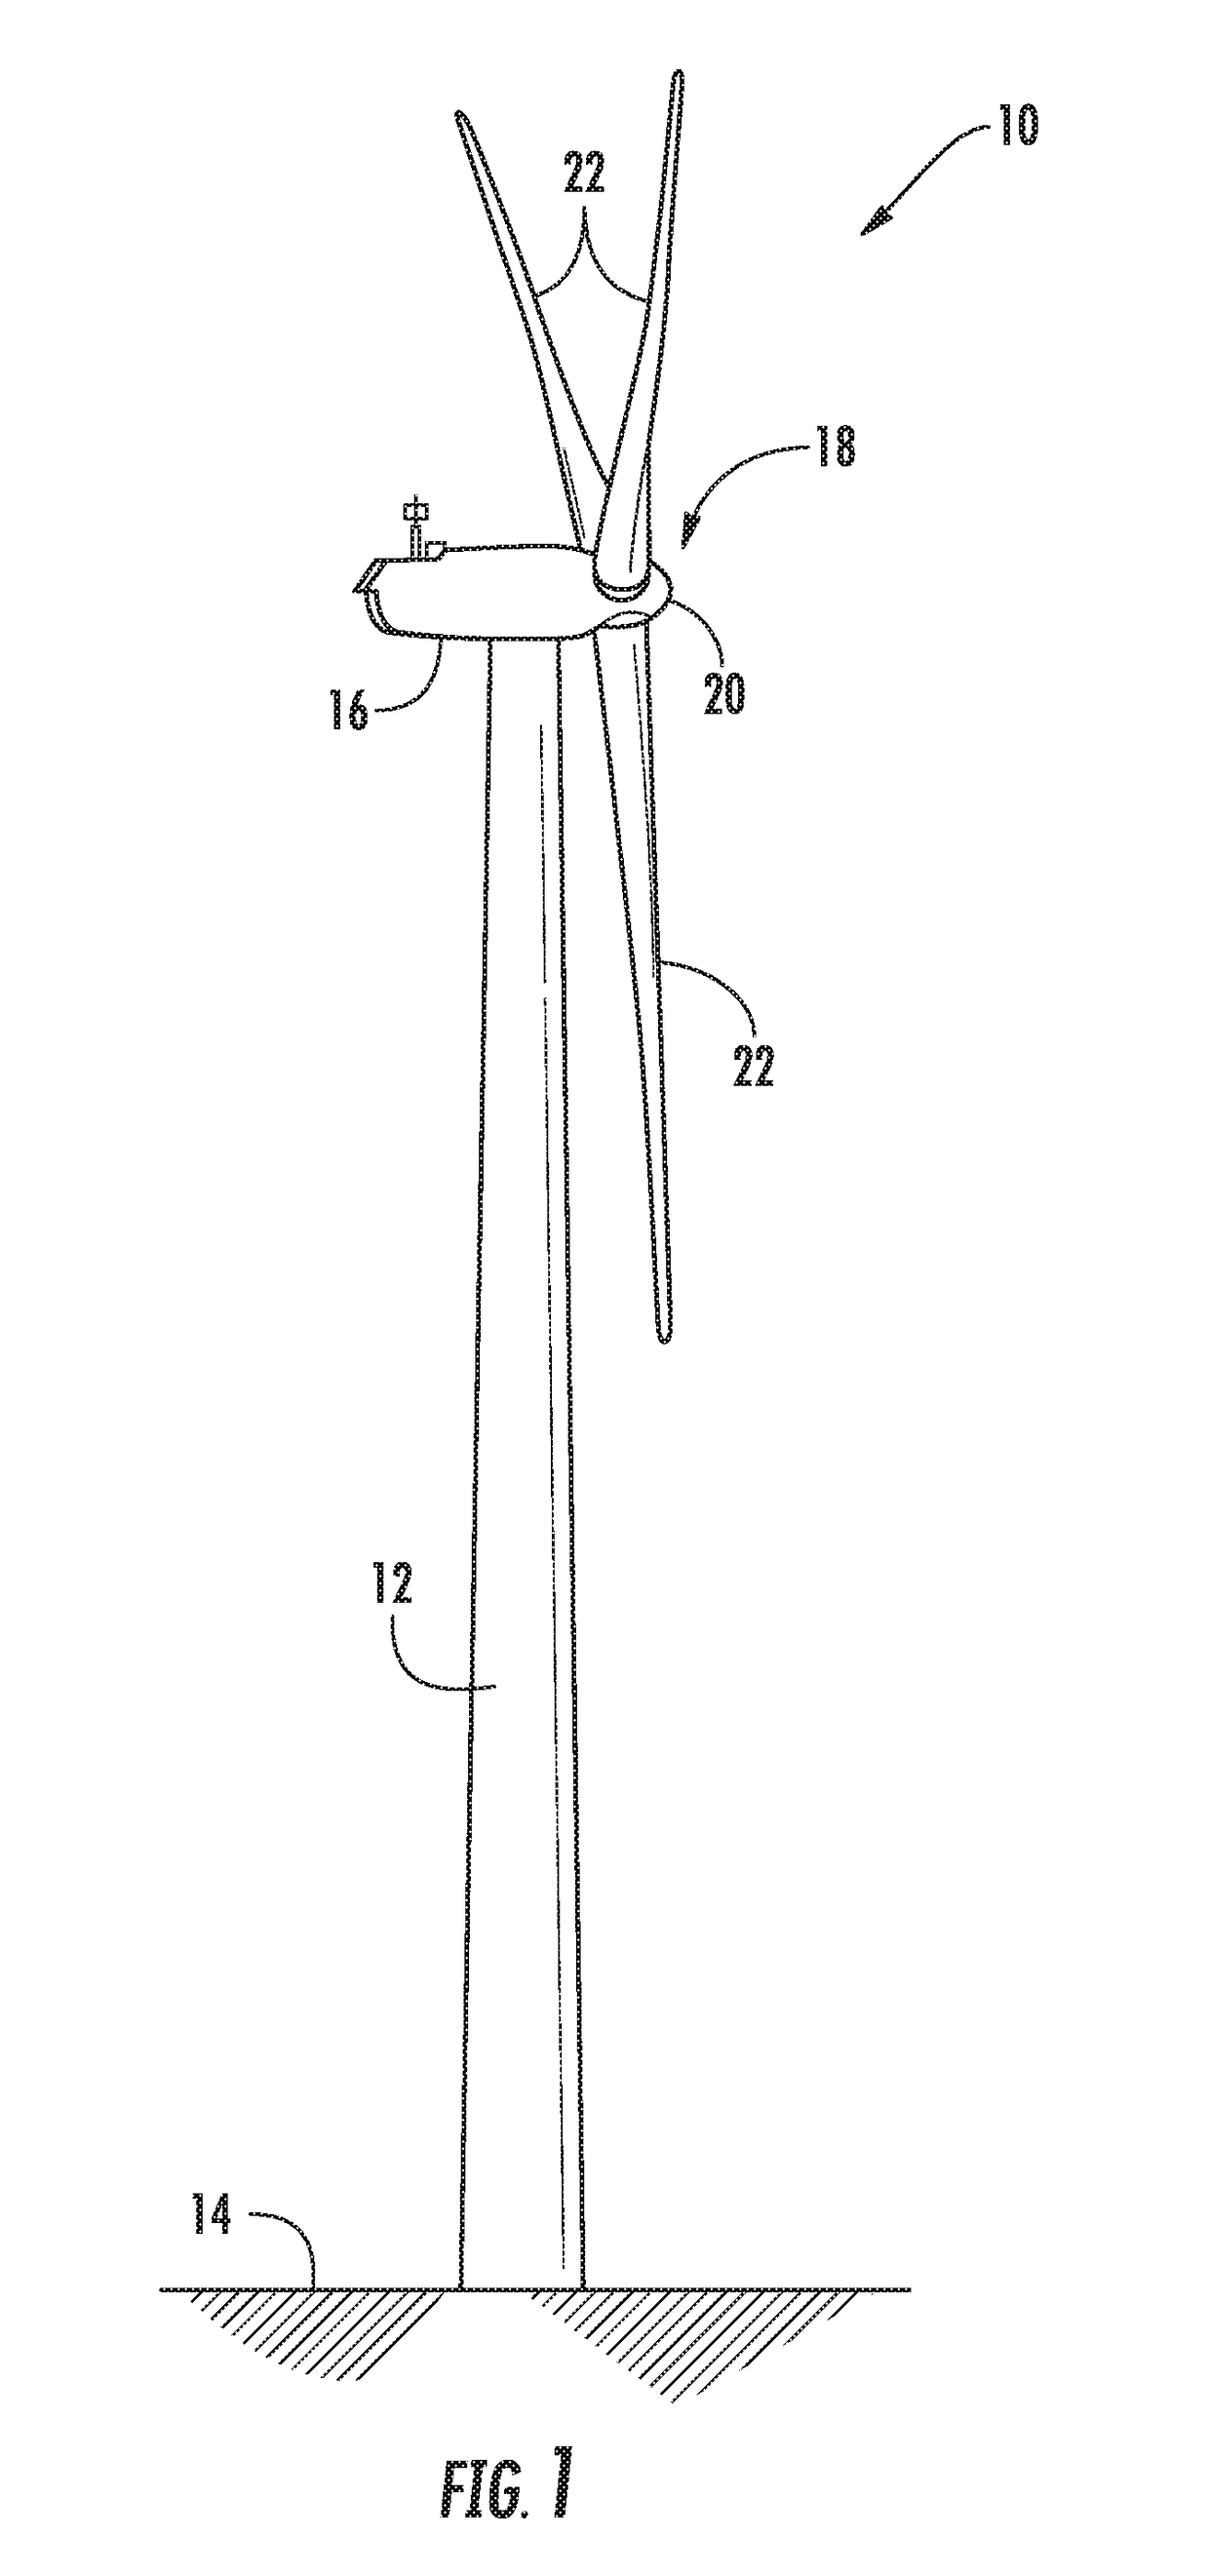 Method for Performing Up-Tower Maintenance on a Gearbox Bearing of a Wind Turbine